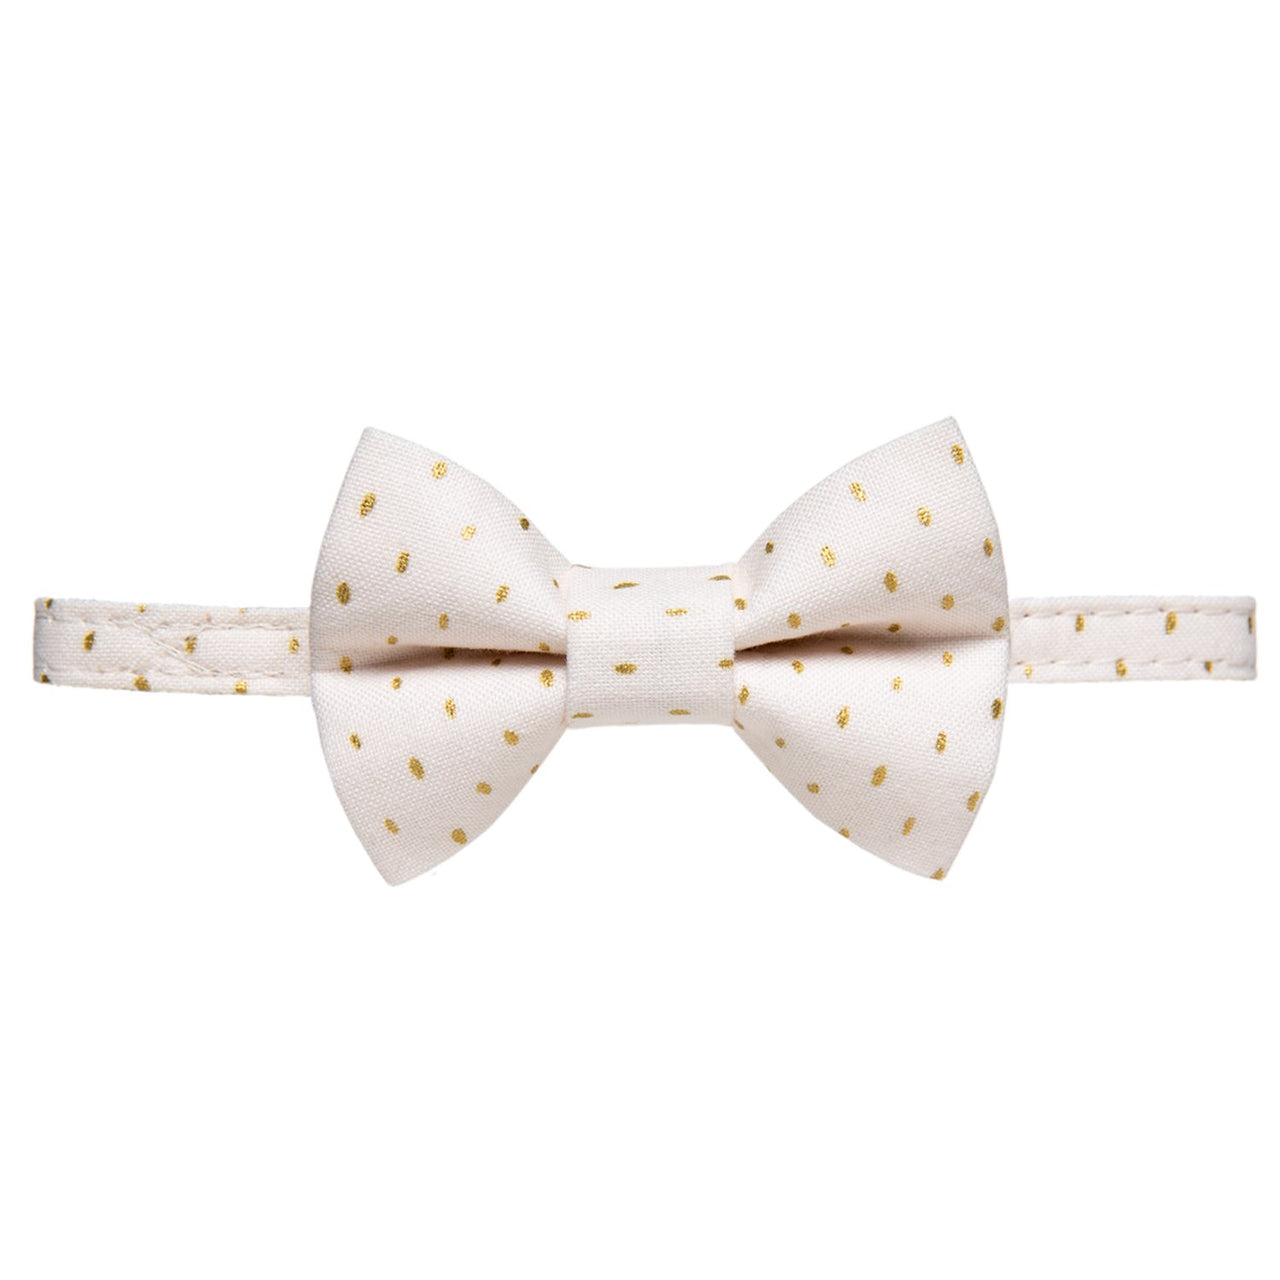 The Blushing Collar + Matching Removable Bow Tie